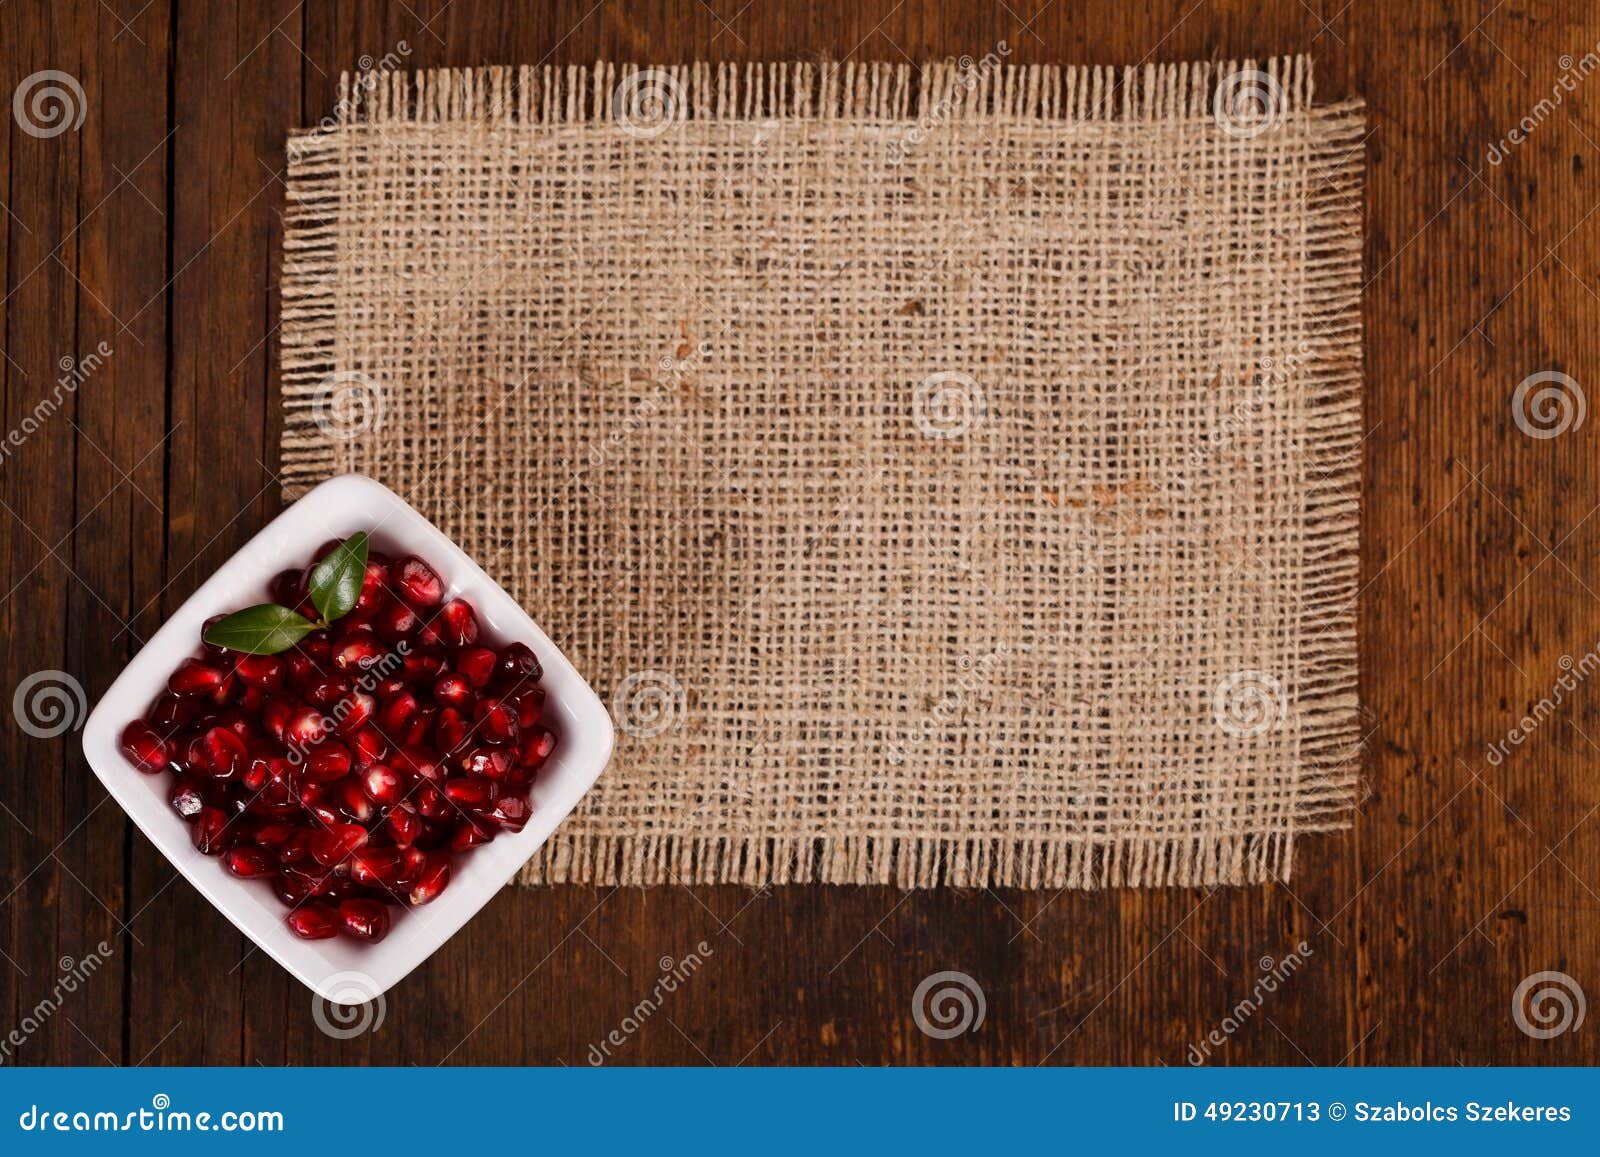 Grenadine seeds in white plate on canvas, wooden background, upper view